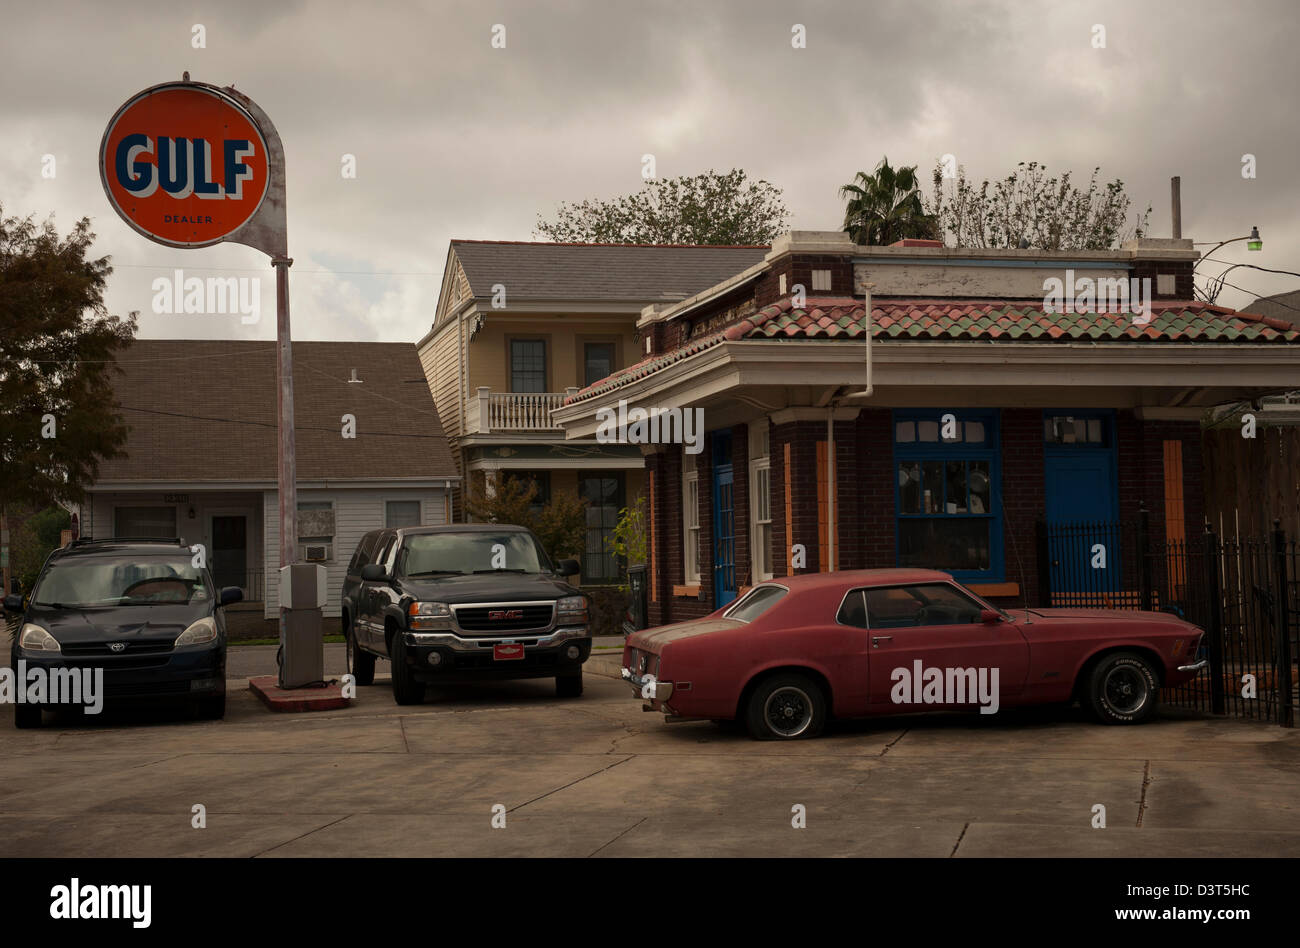 Old Gulf service station in the southern United States with gas pump and used cars. Stock Photo